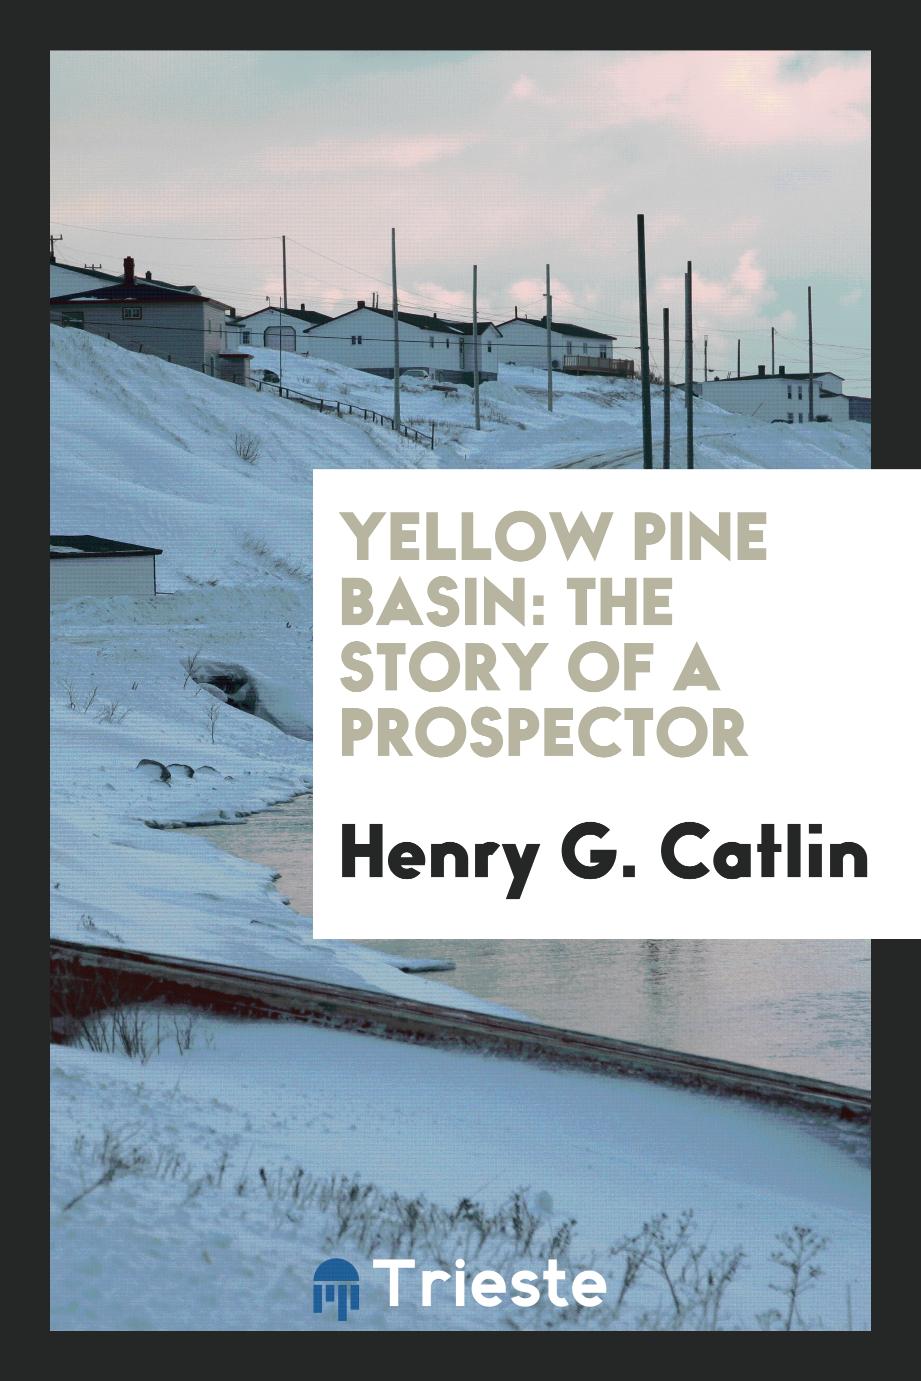 Yellow Pine Basin: the story of a prospector